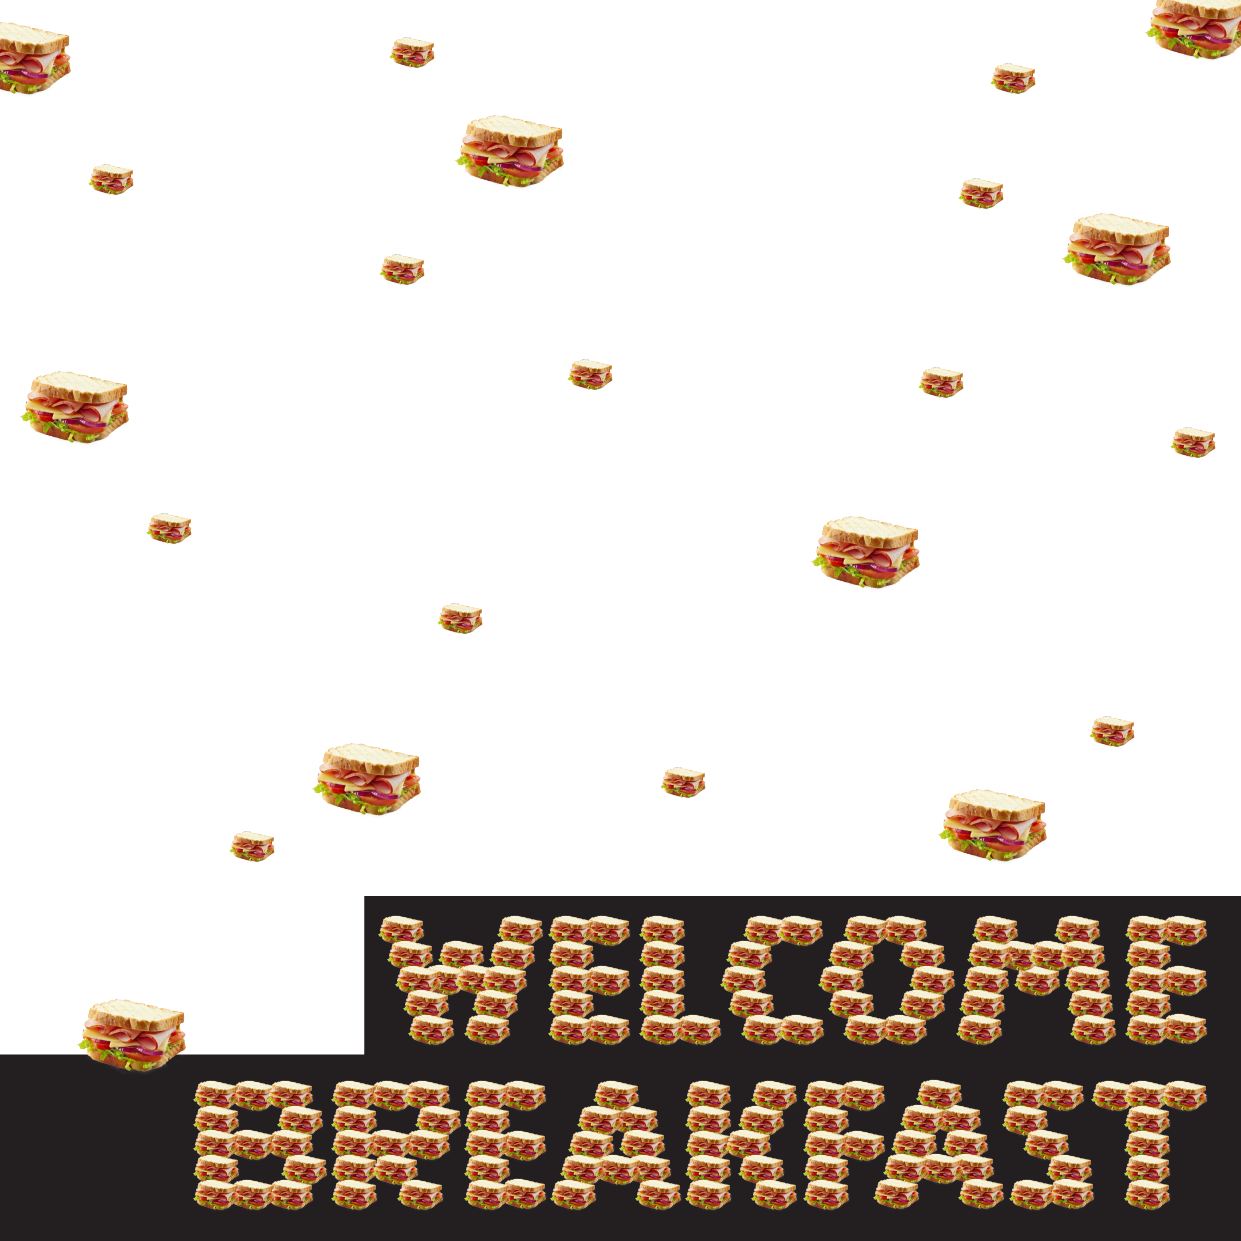 The Welcome Breakfast